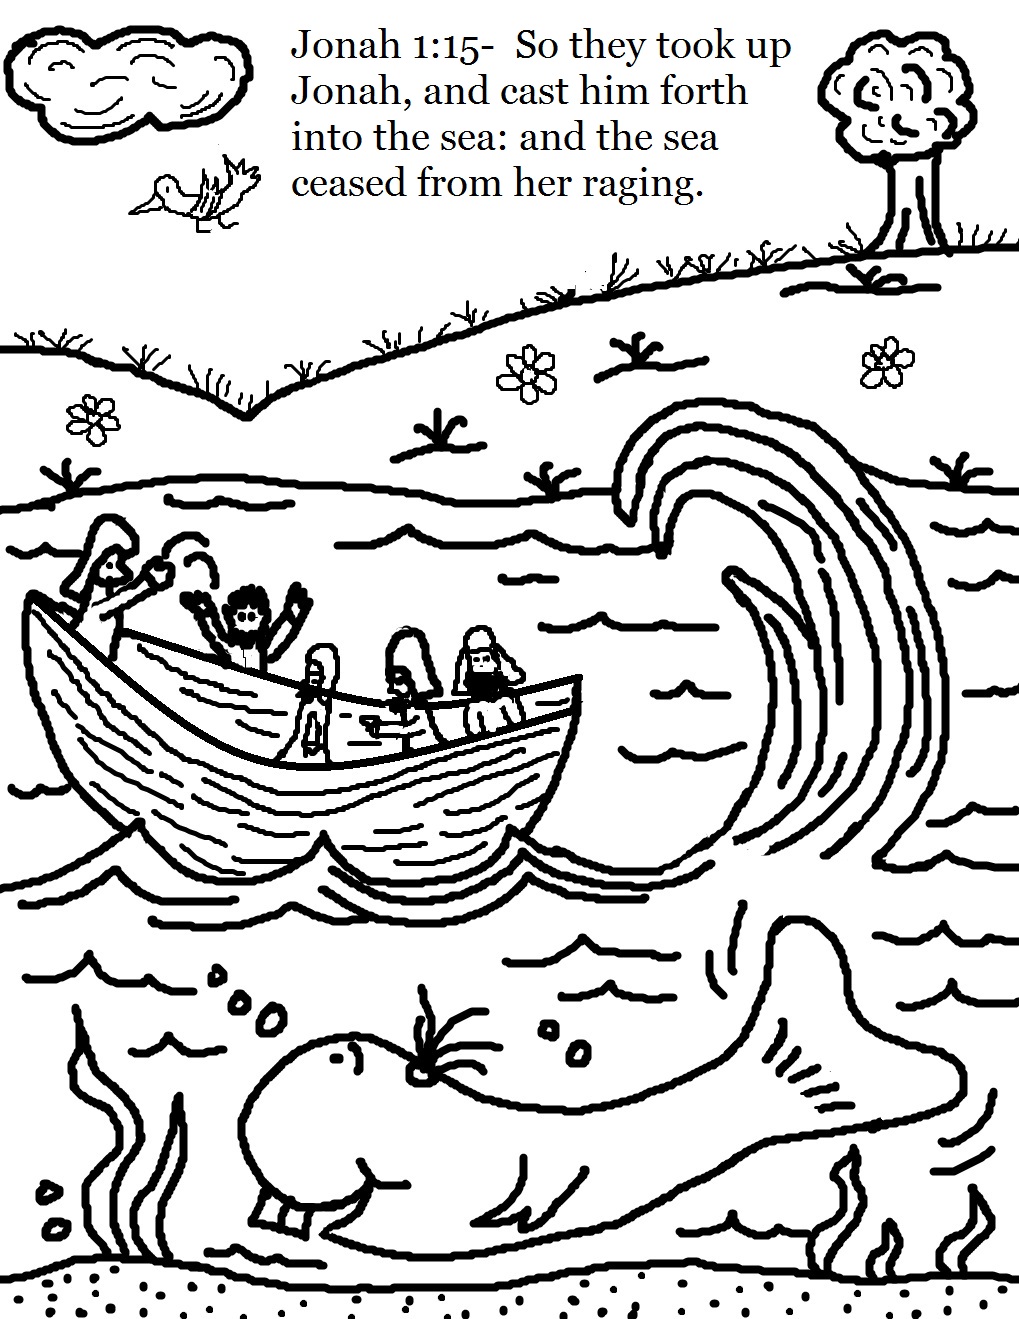 Free Printable Jonah And The Whale Coloring Pages at GetColorings.com